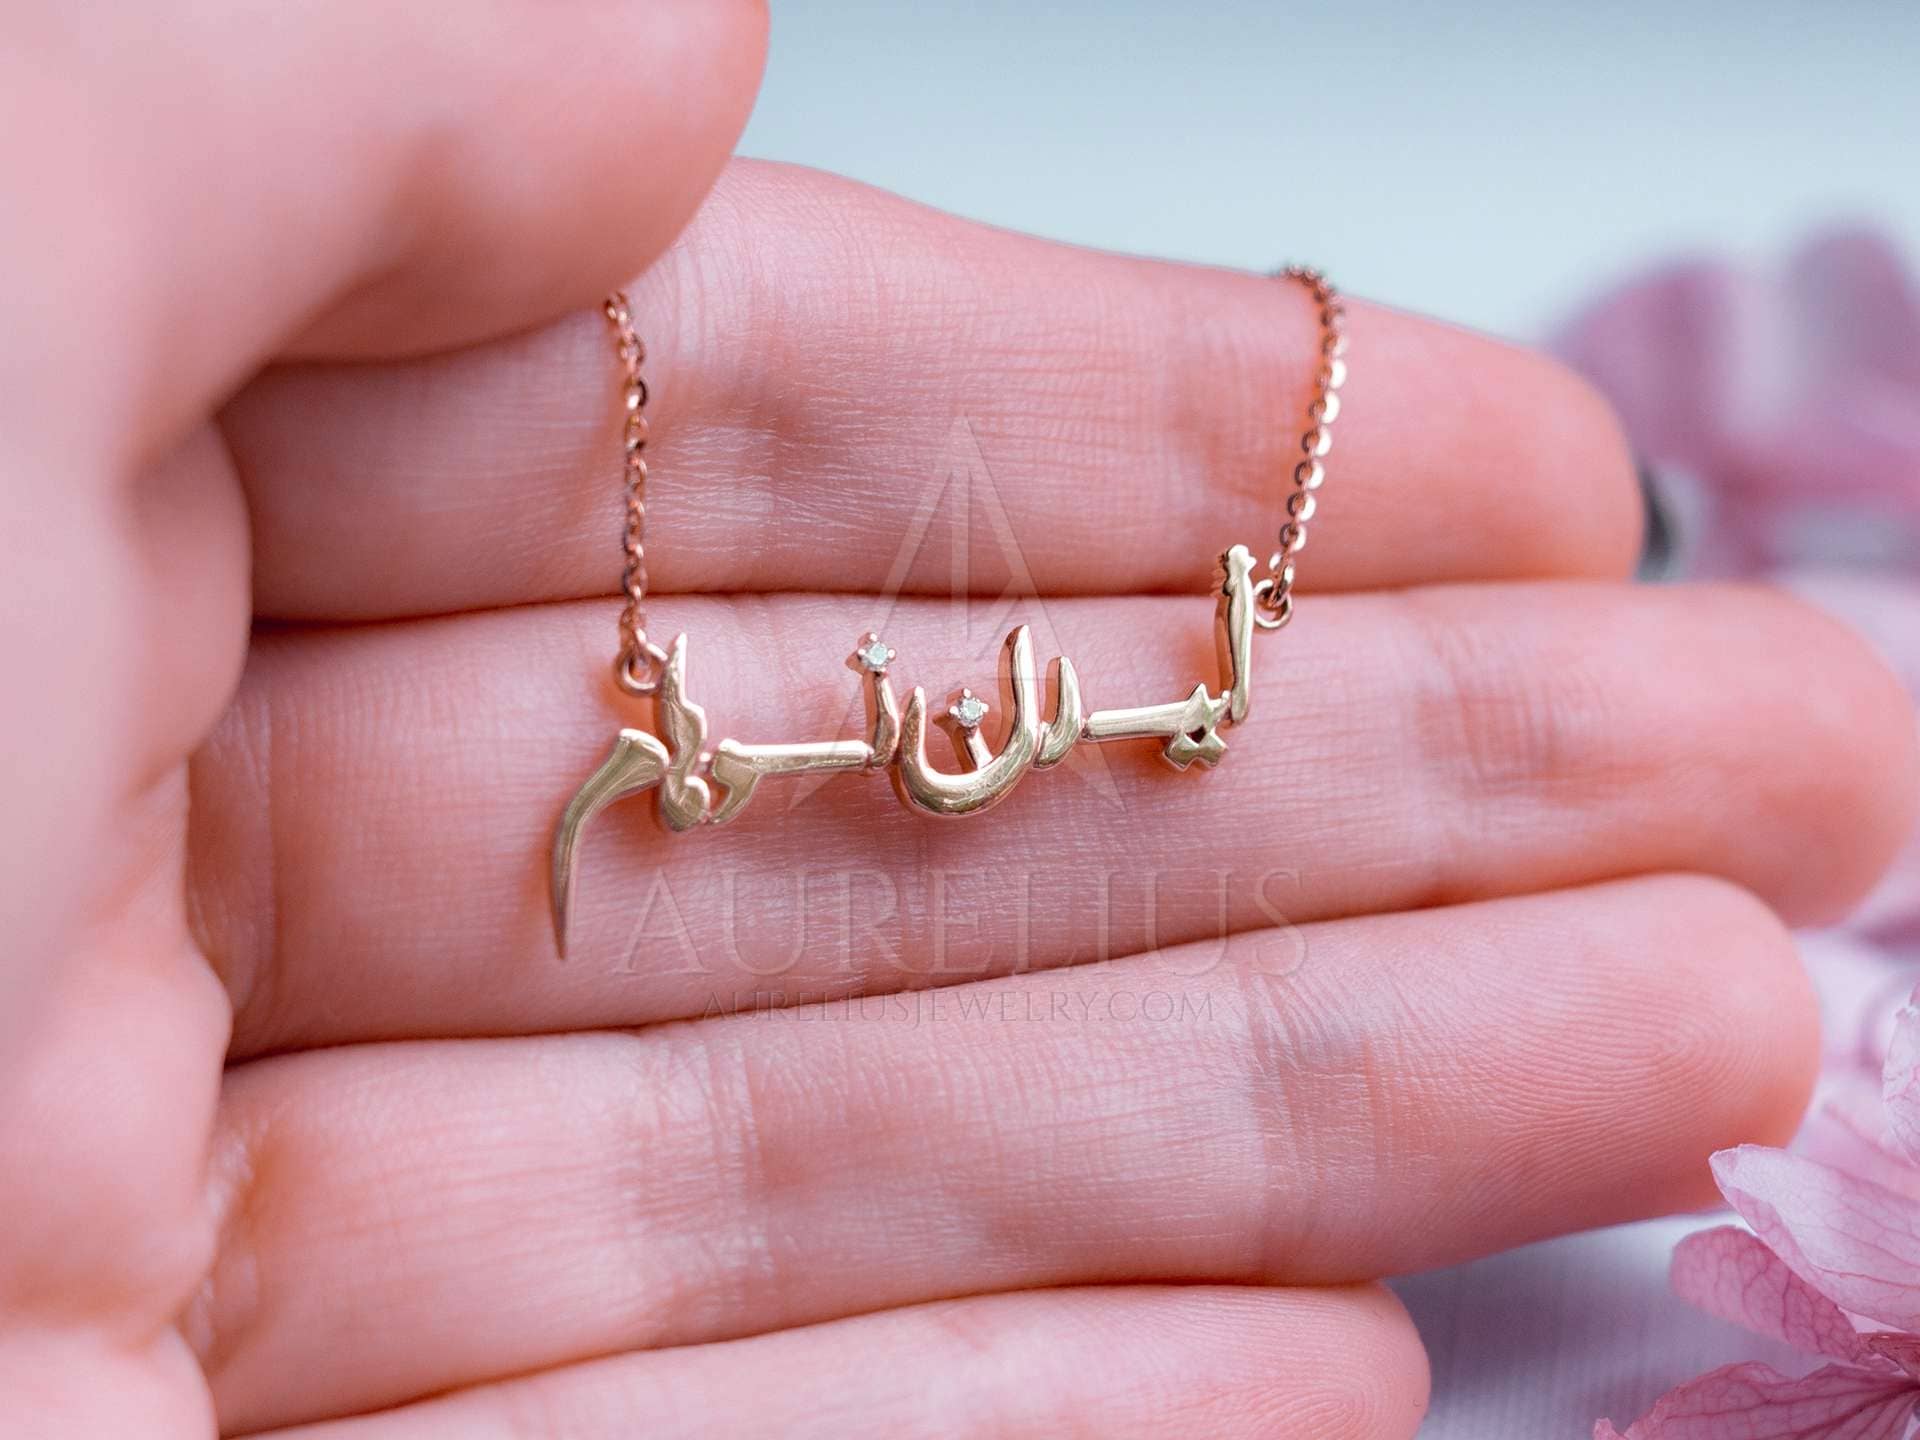 Moon With Star Arabic Name Necklace